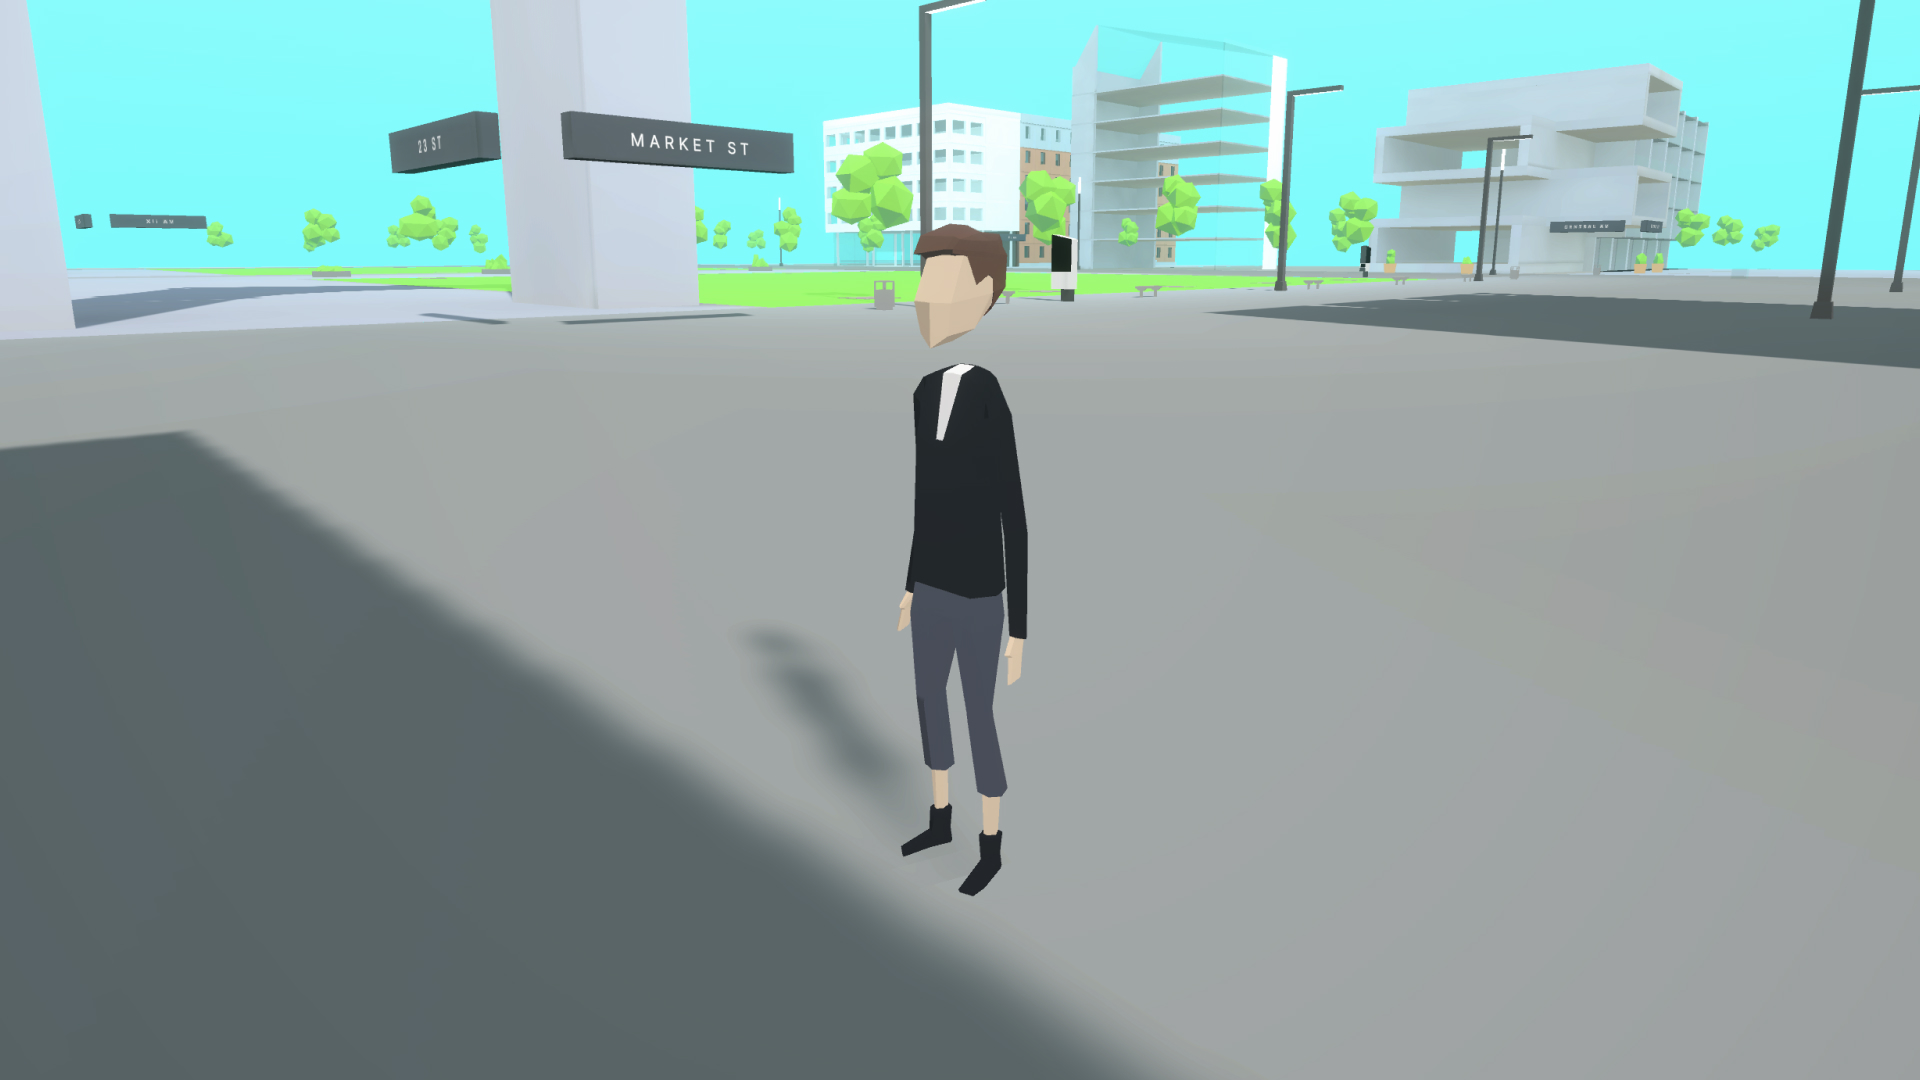 Screenshot of low poly character standing in the street